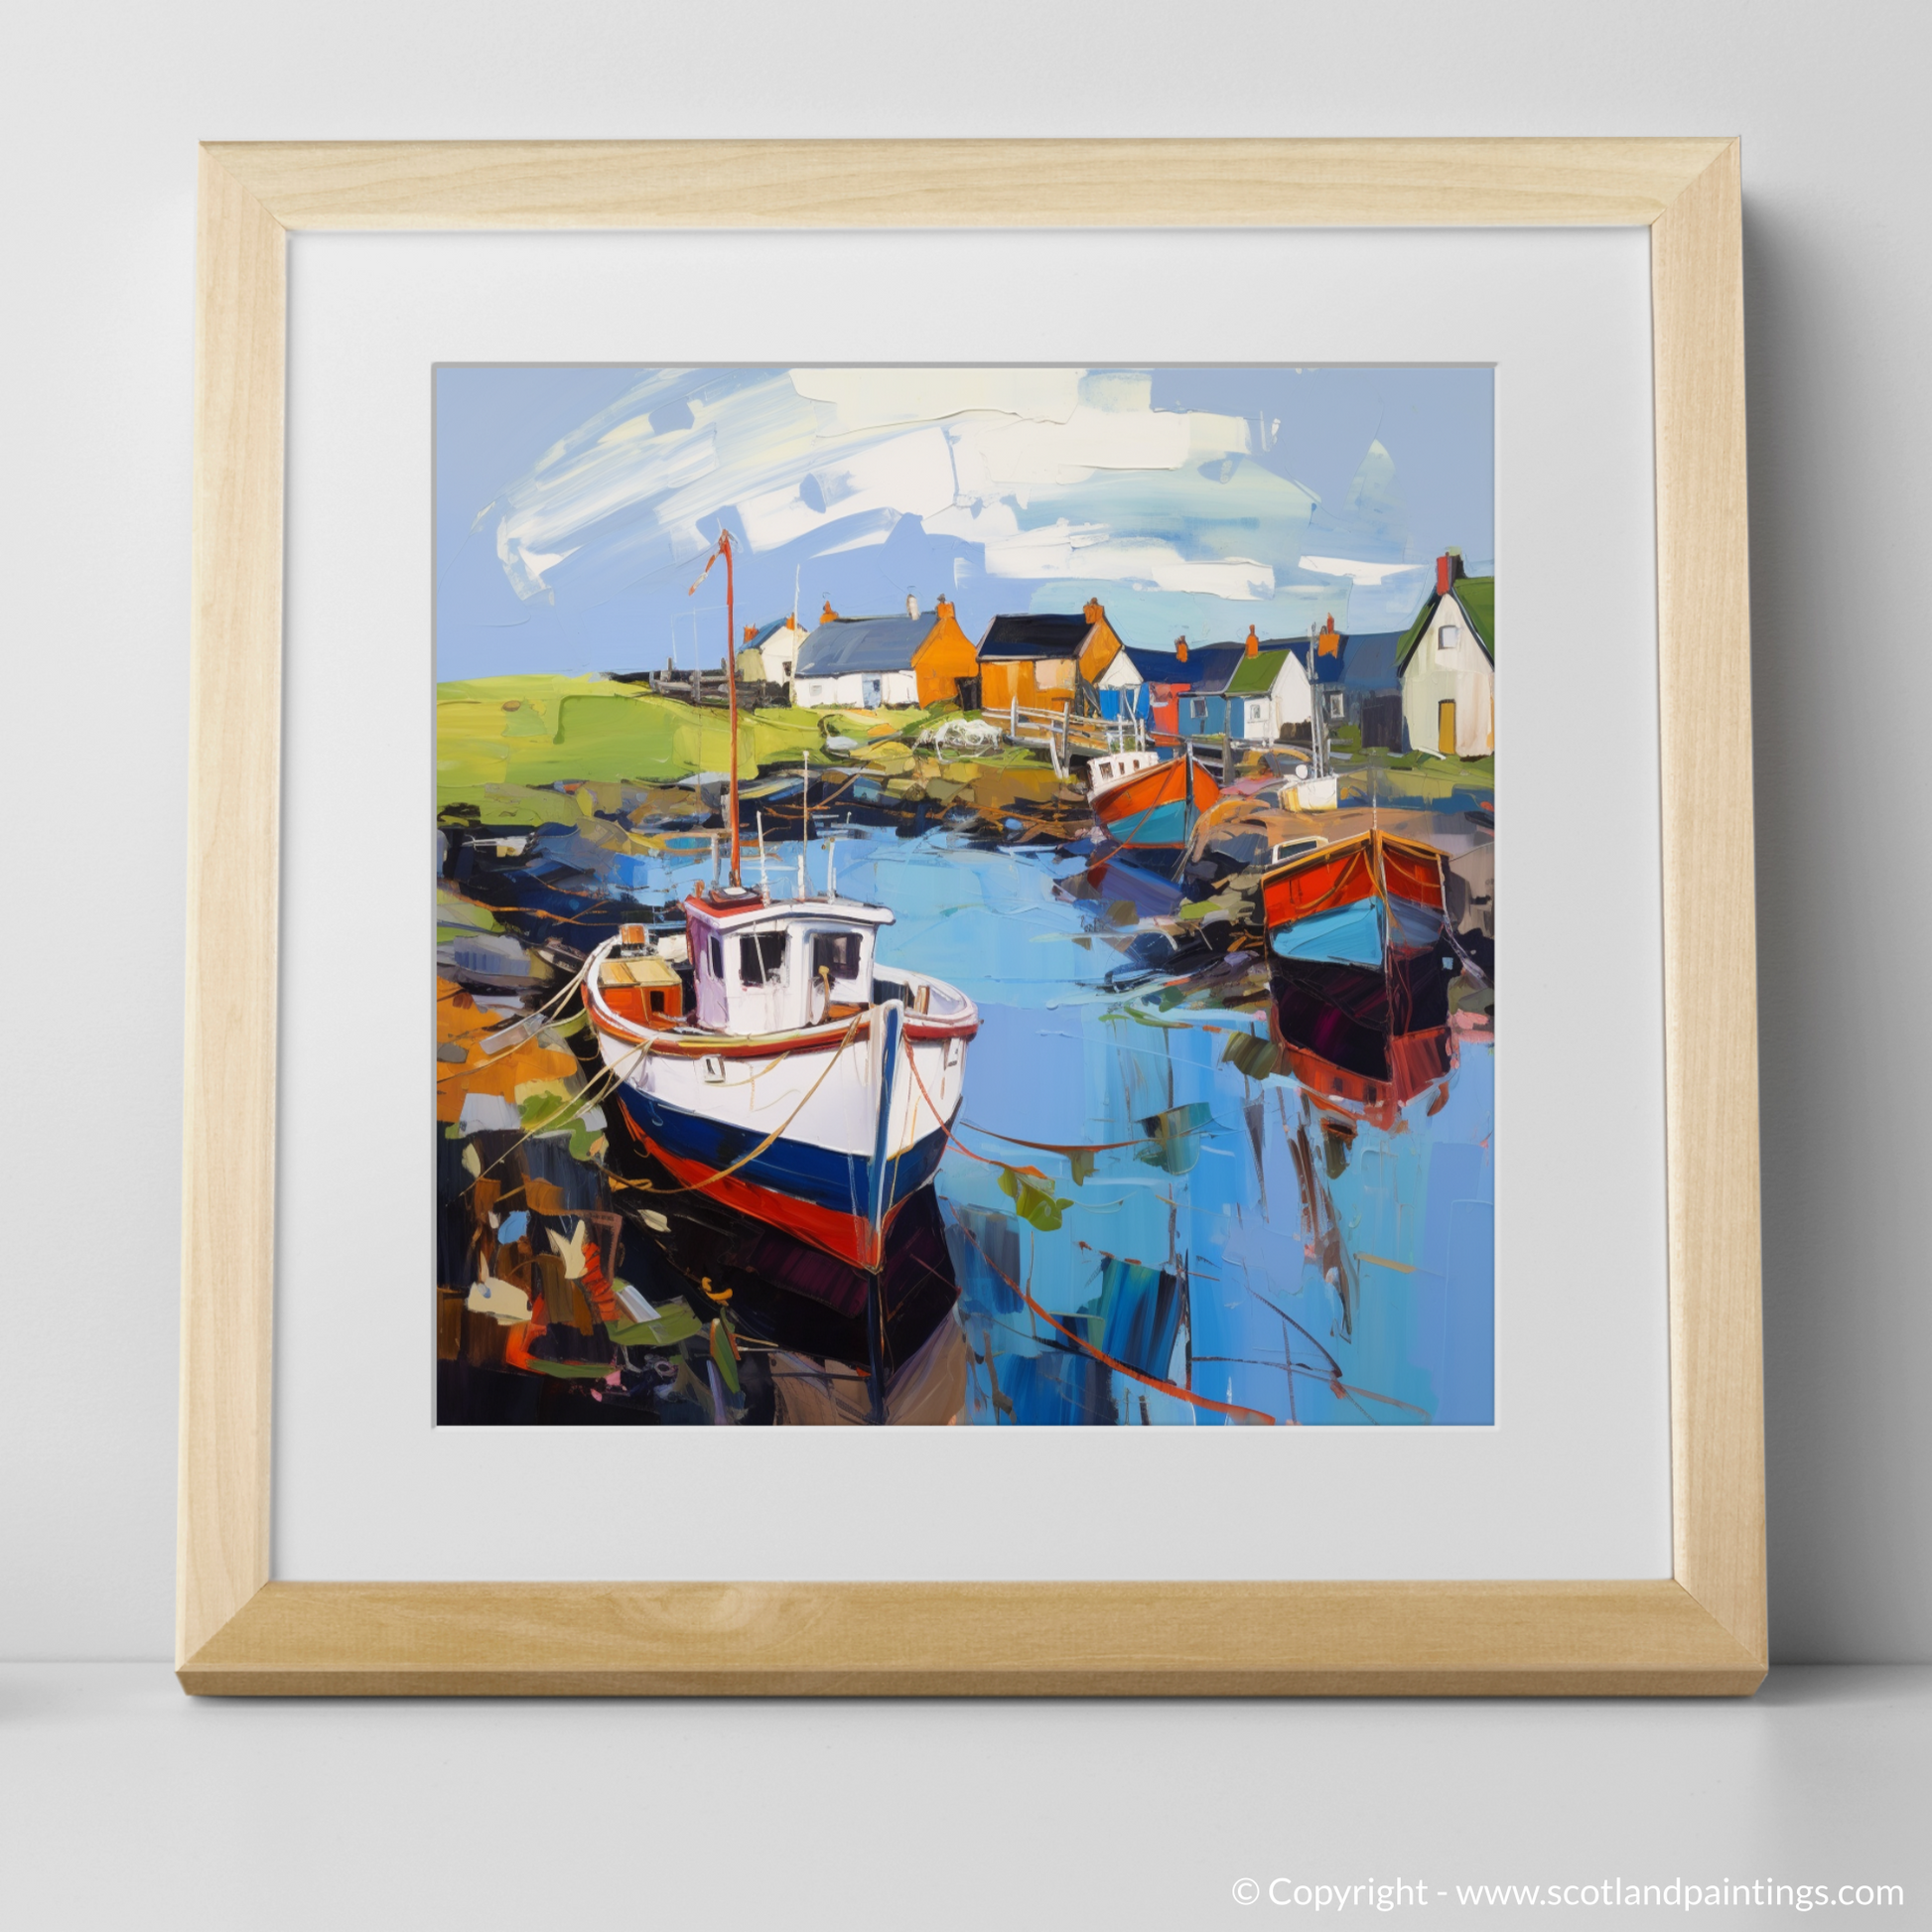 Art Print of Lybster Harbour, Caithness with a natural frame